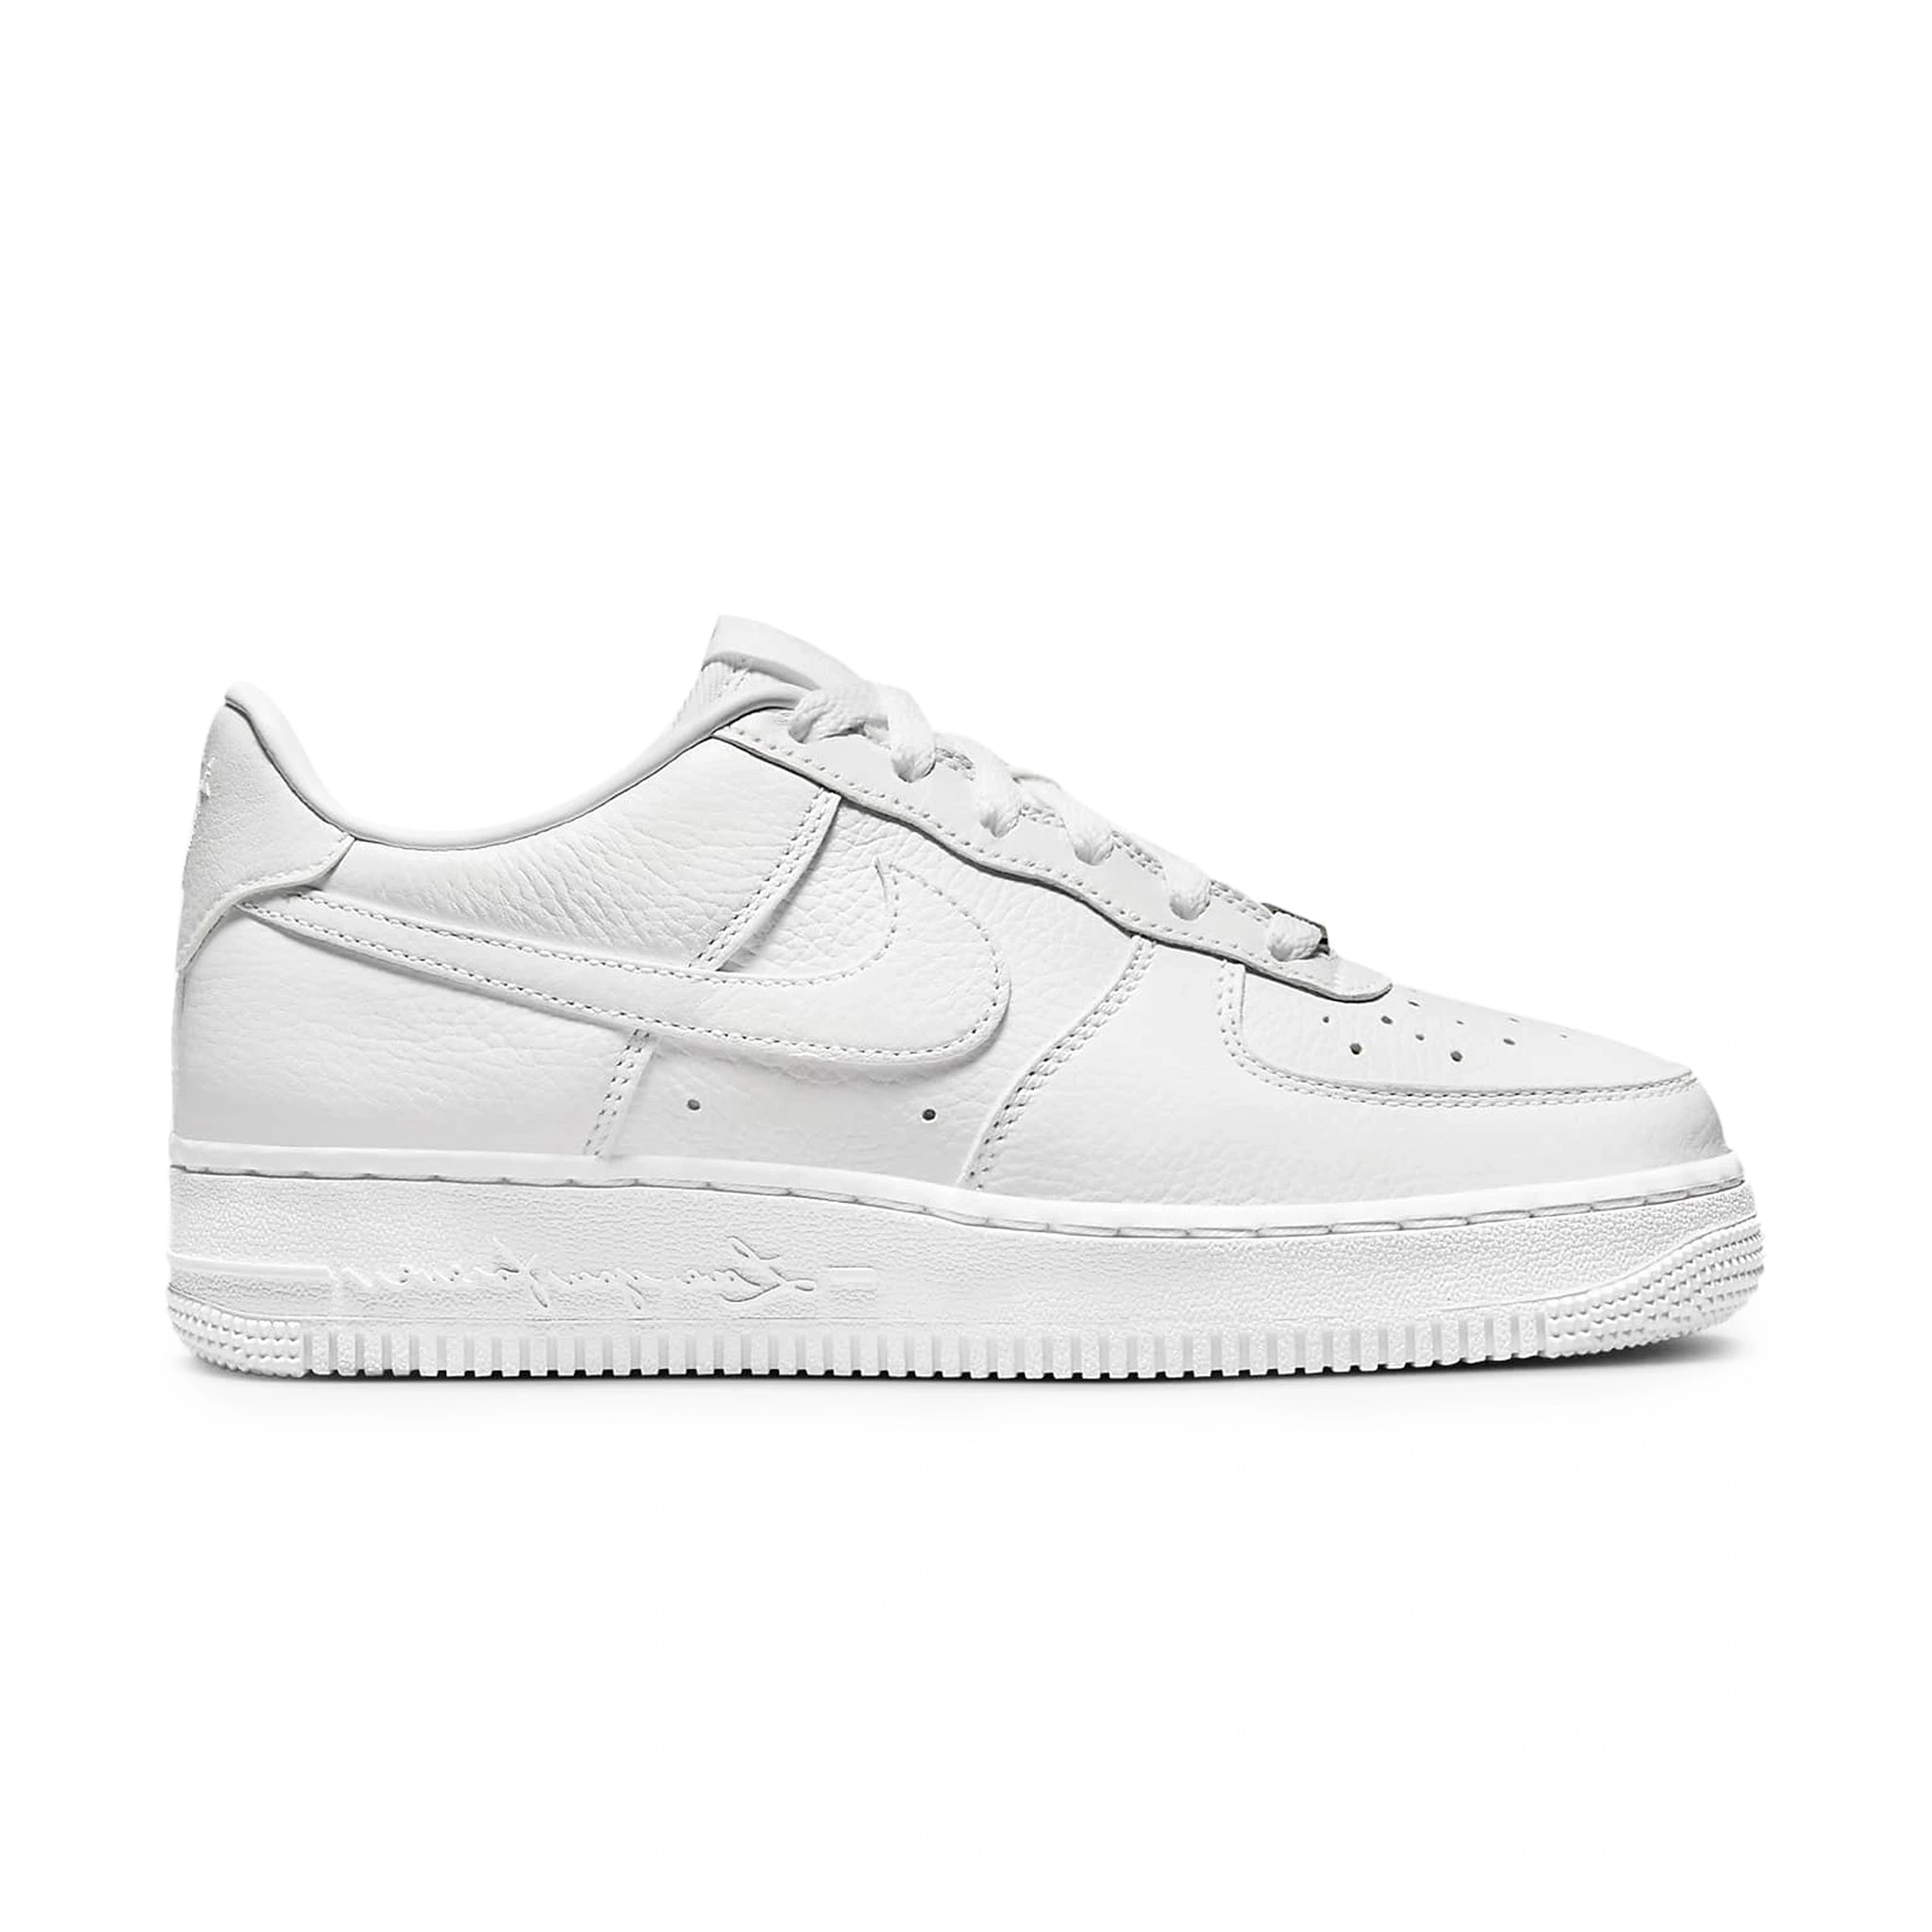 Side view of Nike x Nocta Air Force 1 Low Drake Certified Lover Boy (GS) FV9918-100